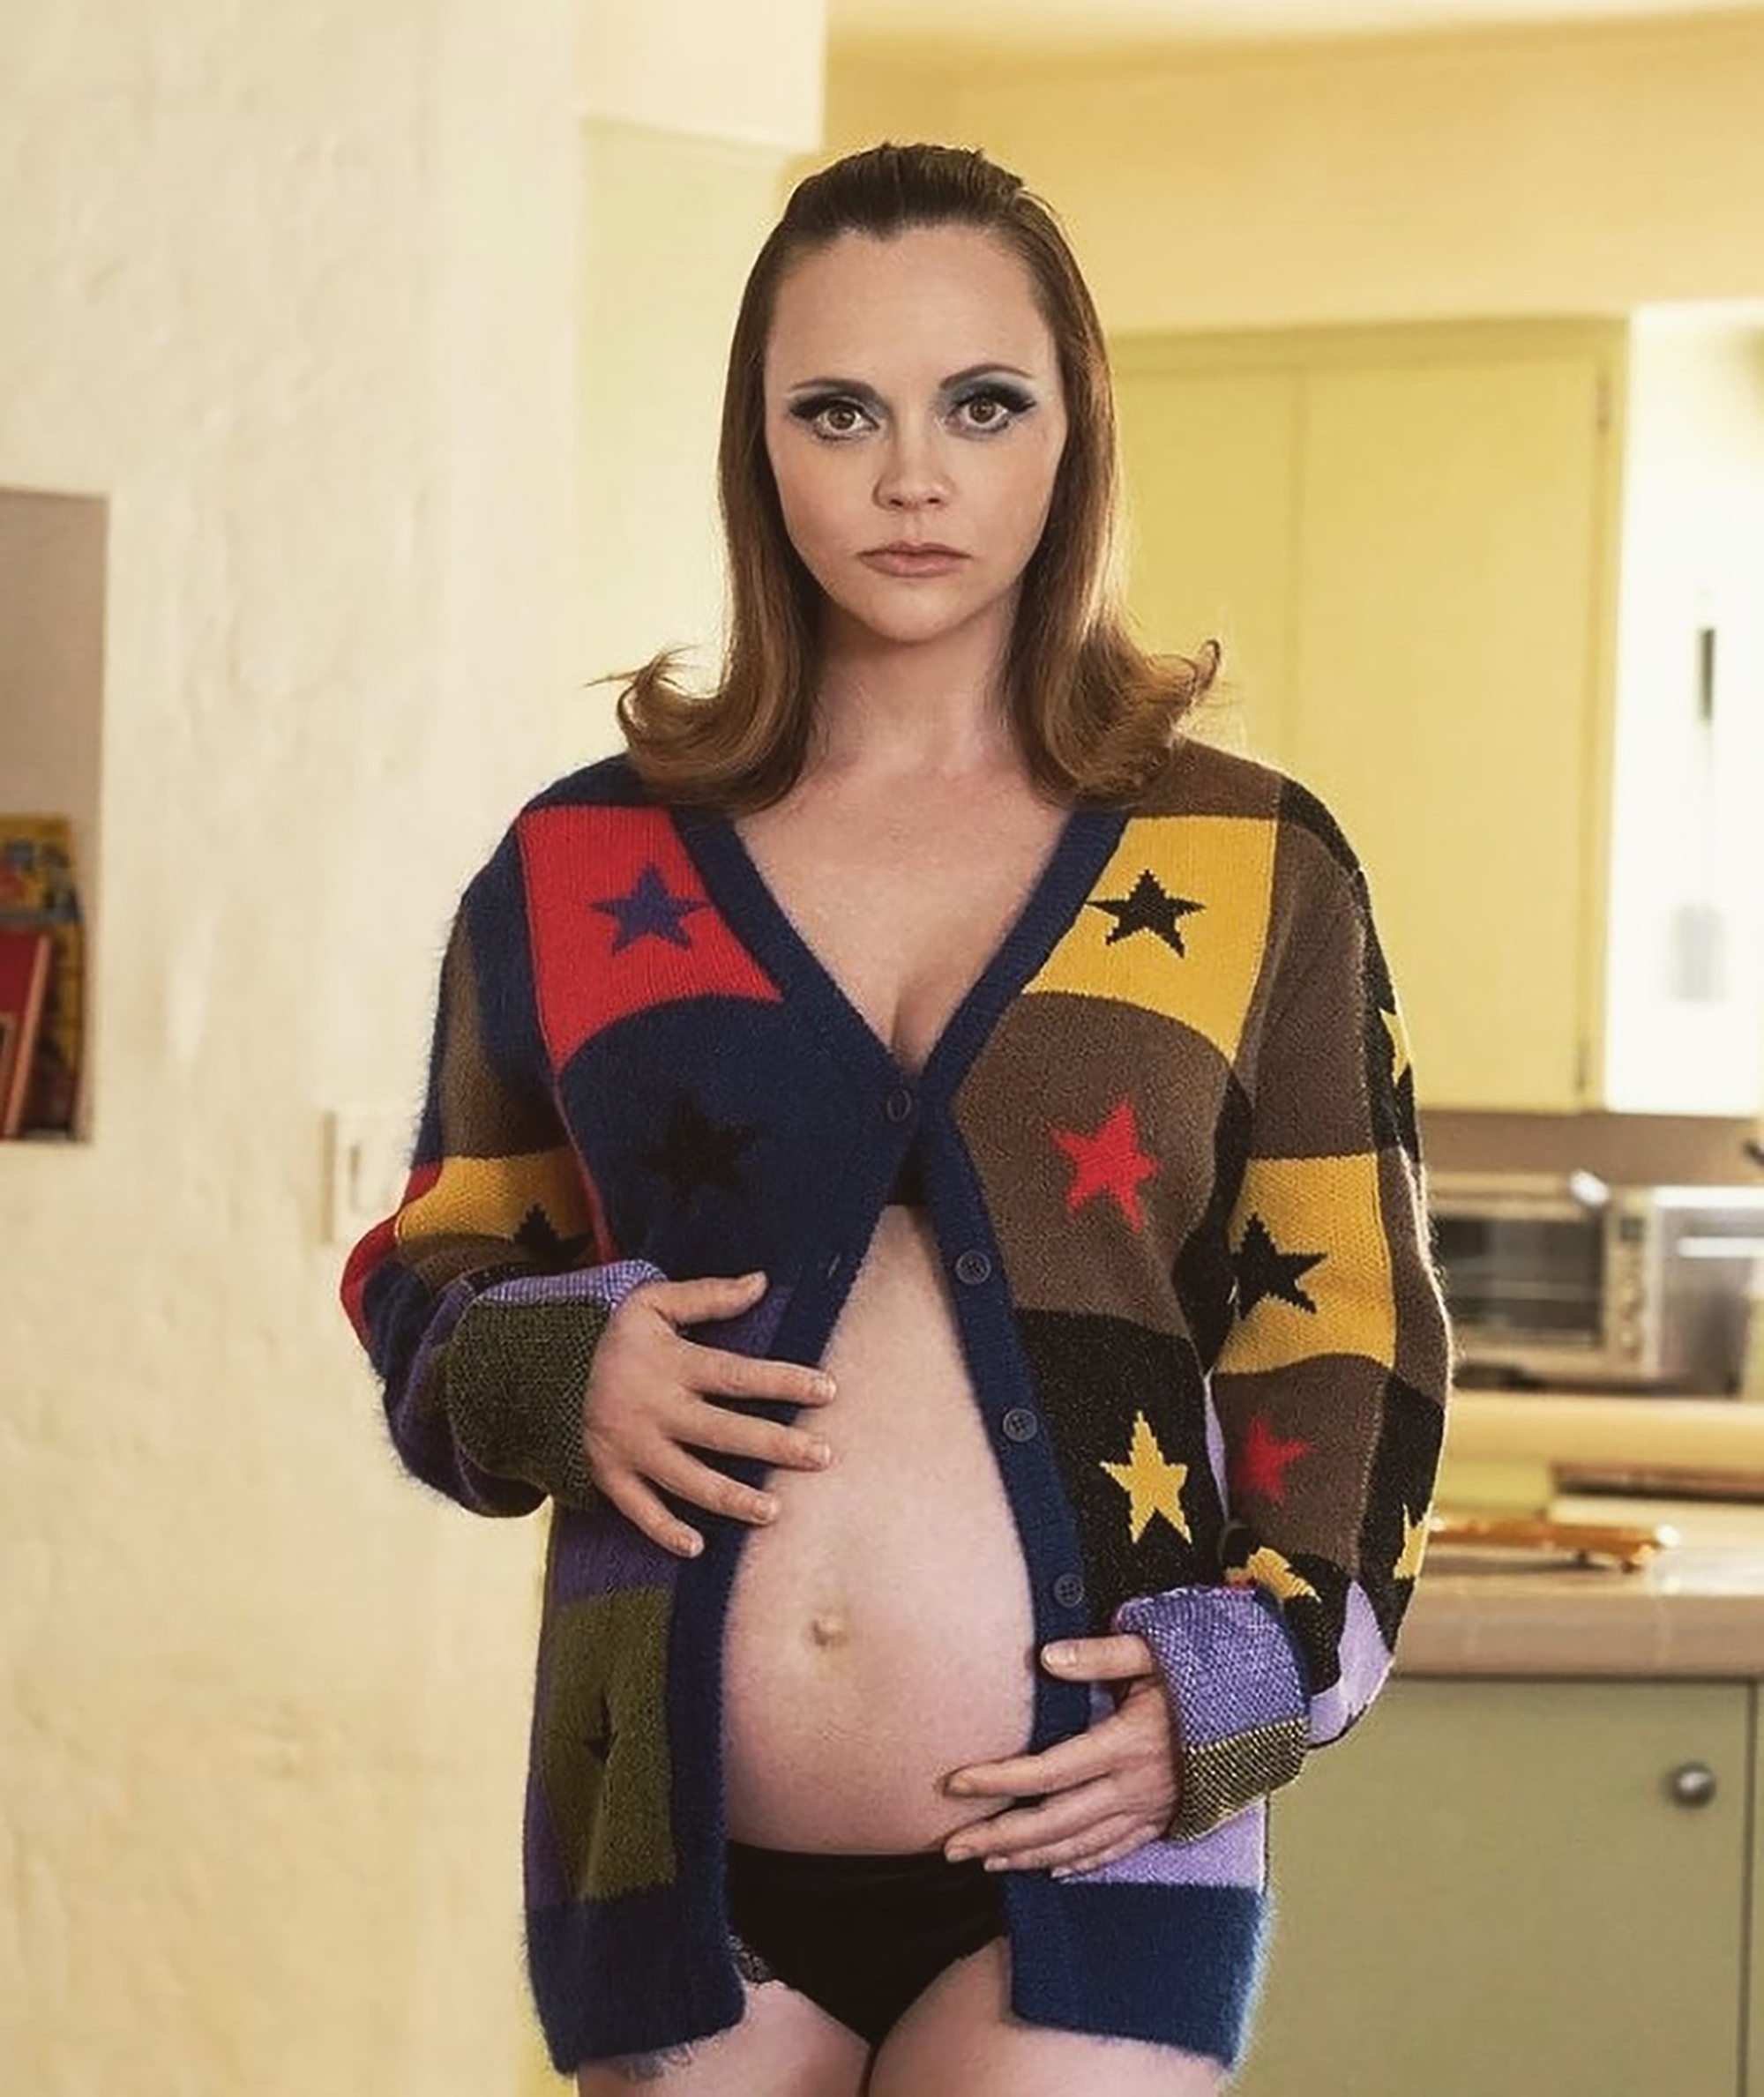 anna wetherbee recommends christina ricci bathing suit pic